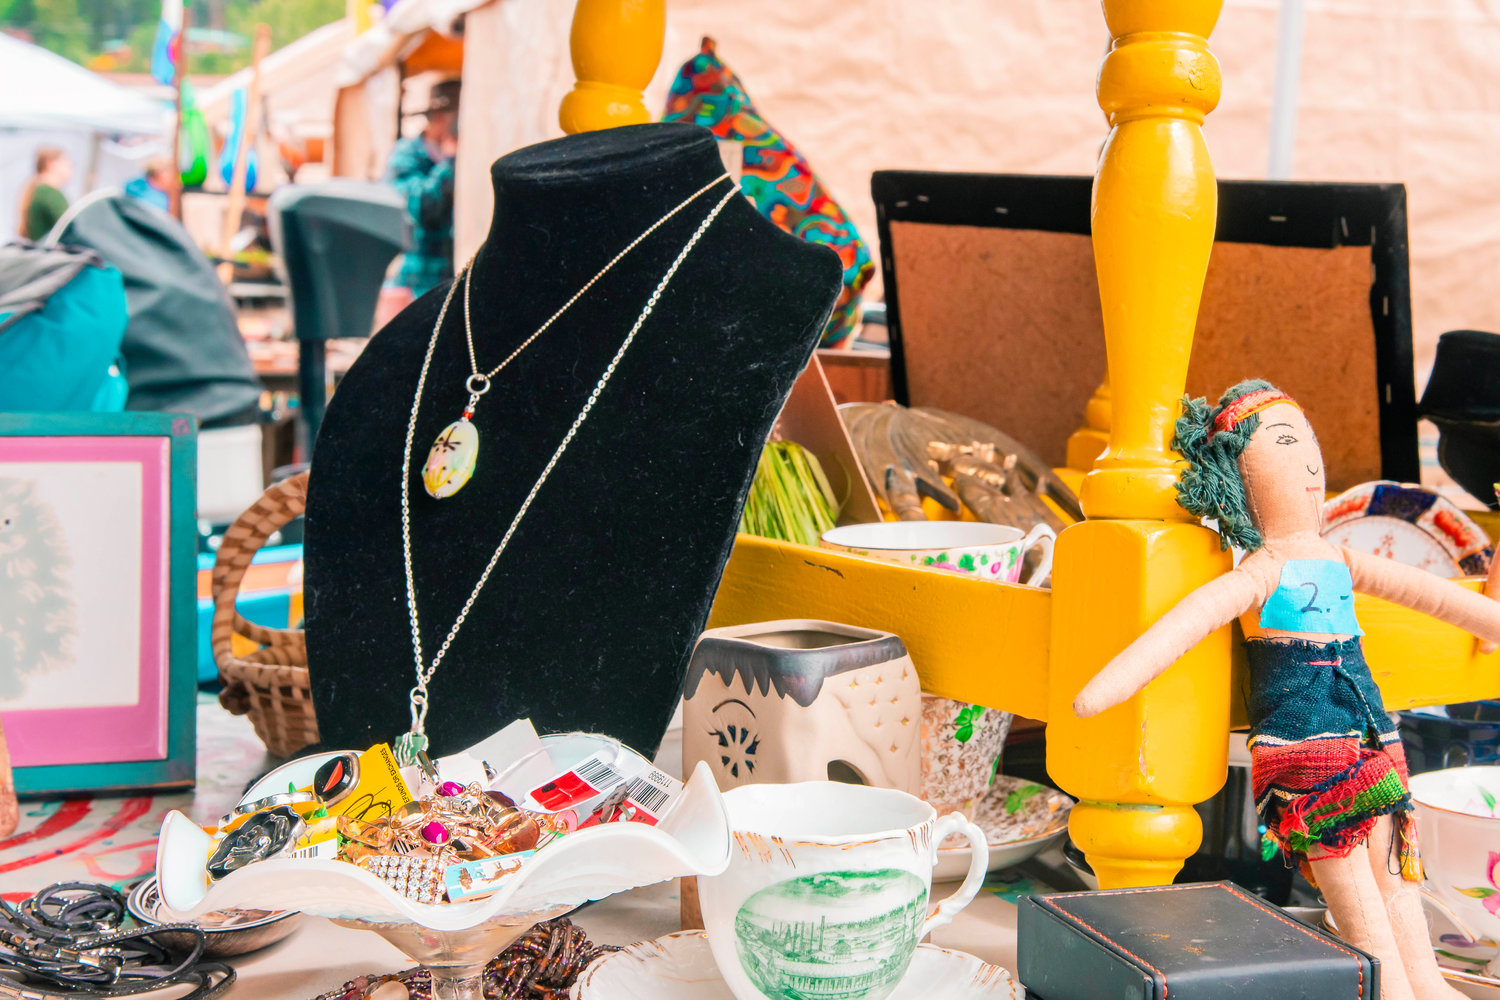 Antiques and jewlery sit on display at the Packwood Flea Market Friday morning.